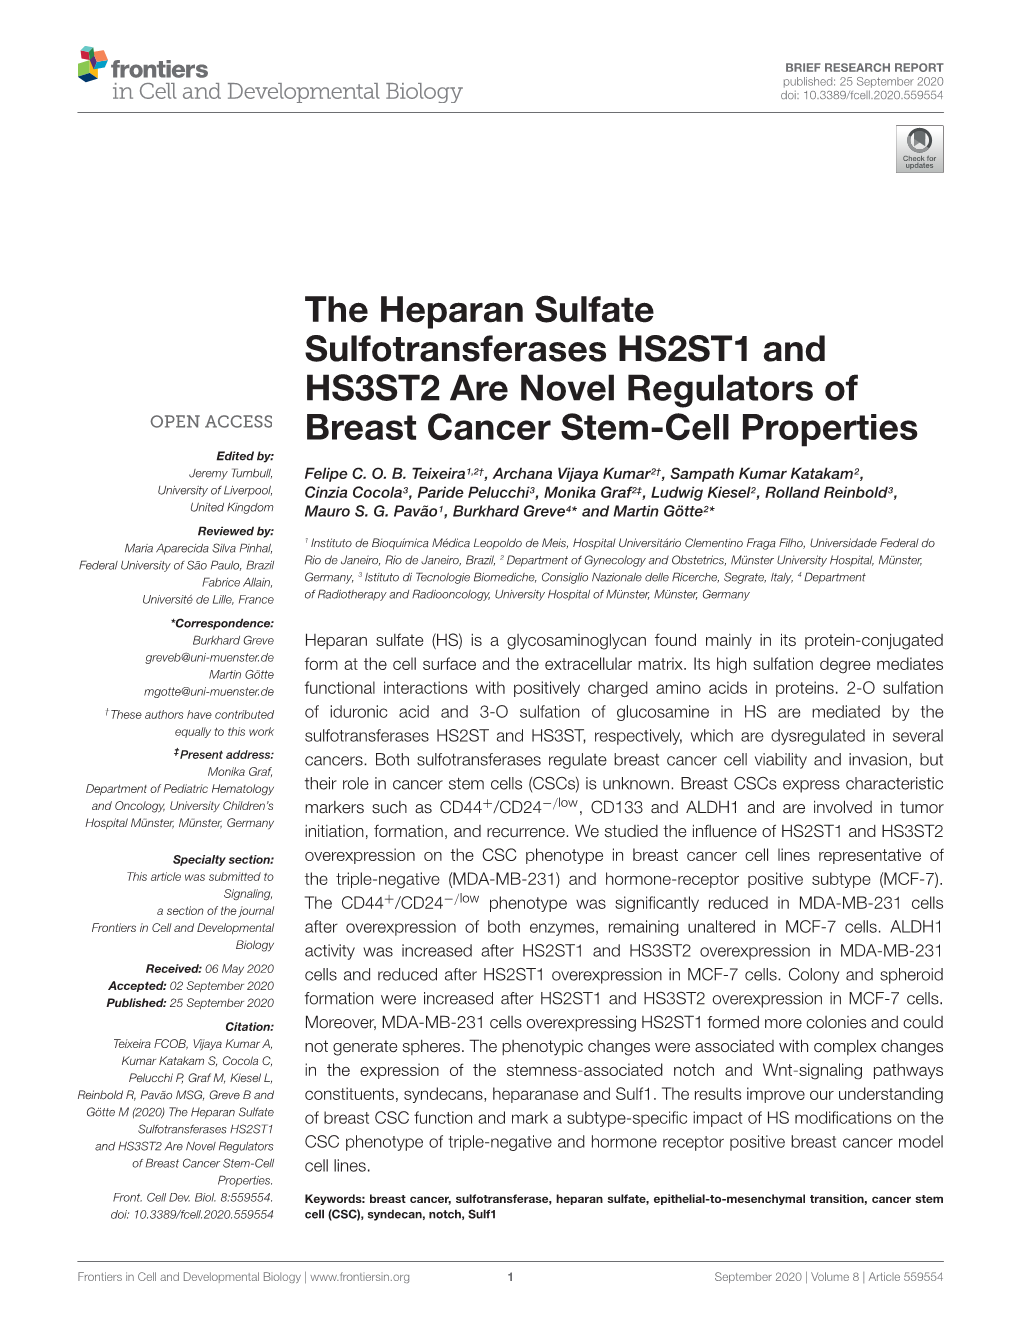 The Heparan Sulfate Sulfotransferases HS2ST1 and HS3ST2 Are Novel Regulators of Breast Cancer Stem-Cell Properties Edited By: Jeremy Turnbull, Felipe C